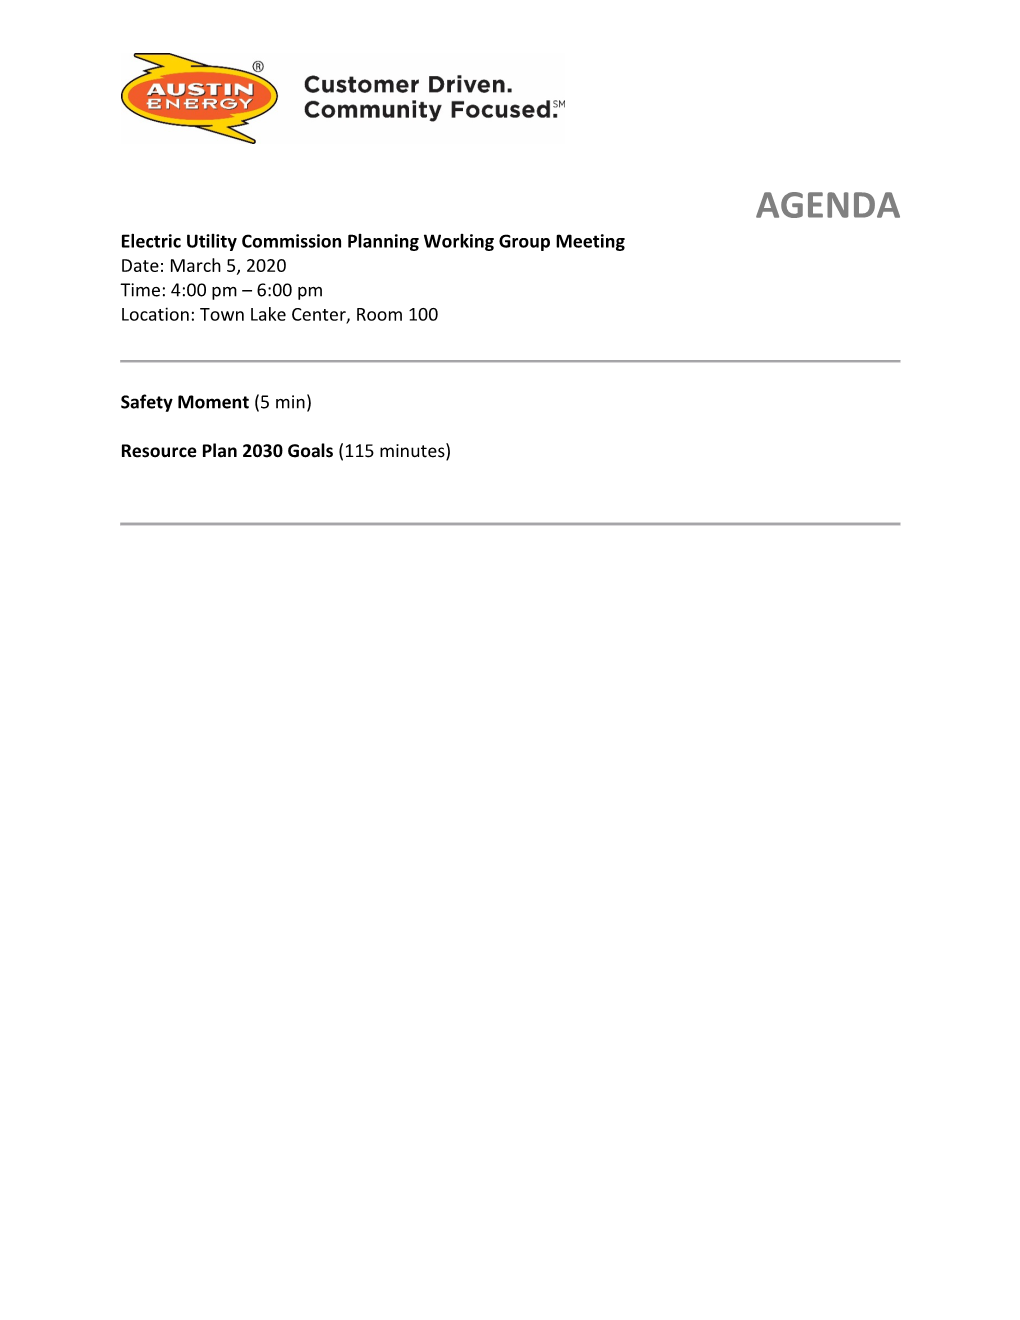 AGENDA Electric Utility Commission Planning Working Group Meeting Date: March 5, 2020 Time: 4:00 Pm – 6:00 Pm Location: Town Lake Center, Room 100